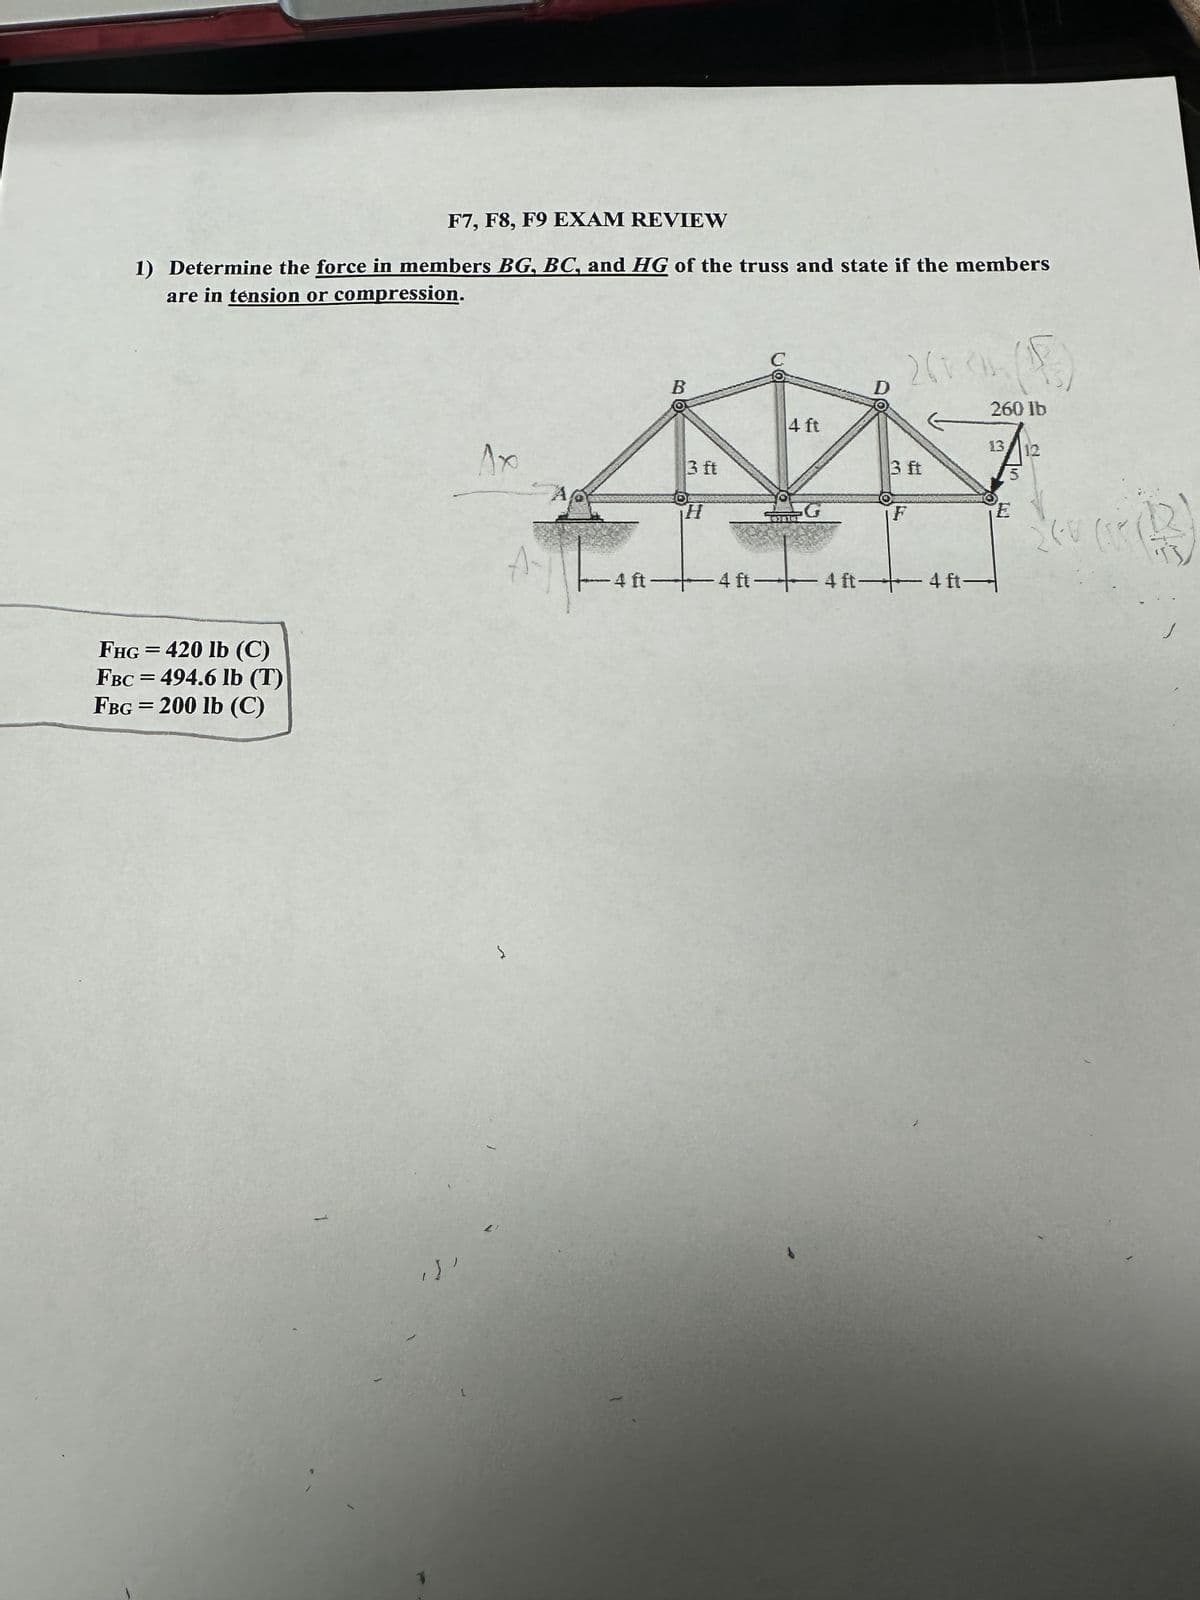 F7, F8, F9 EXAM REVIEW
1) Determine the force in members BG, BC, and HG of the truss and state if the members
are in tension or compression.
FHG = 420 lb (C)
FBC = 494.6 lb (T)
FBG=200 lb (C)
1
.)'
Ax
A
Į
-4 ft
B
3 ft
H
4 ft
4 ft-4f
D
2603h (15)
260 lb
3 ft
F
+4 ft-
13 12
3
E
(r (13)
24V (R